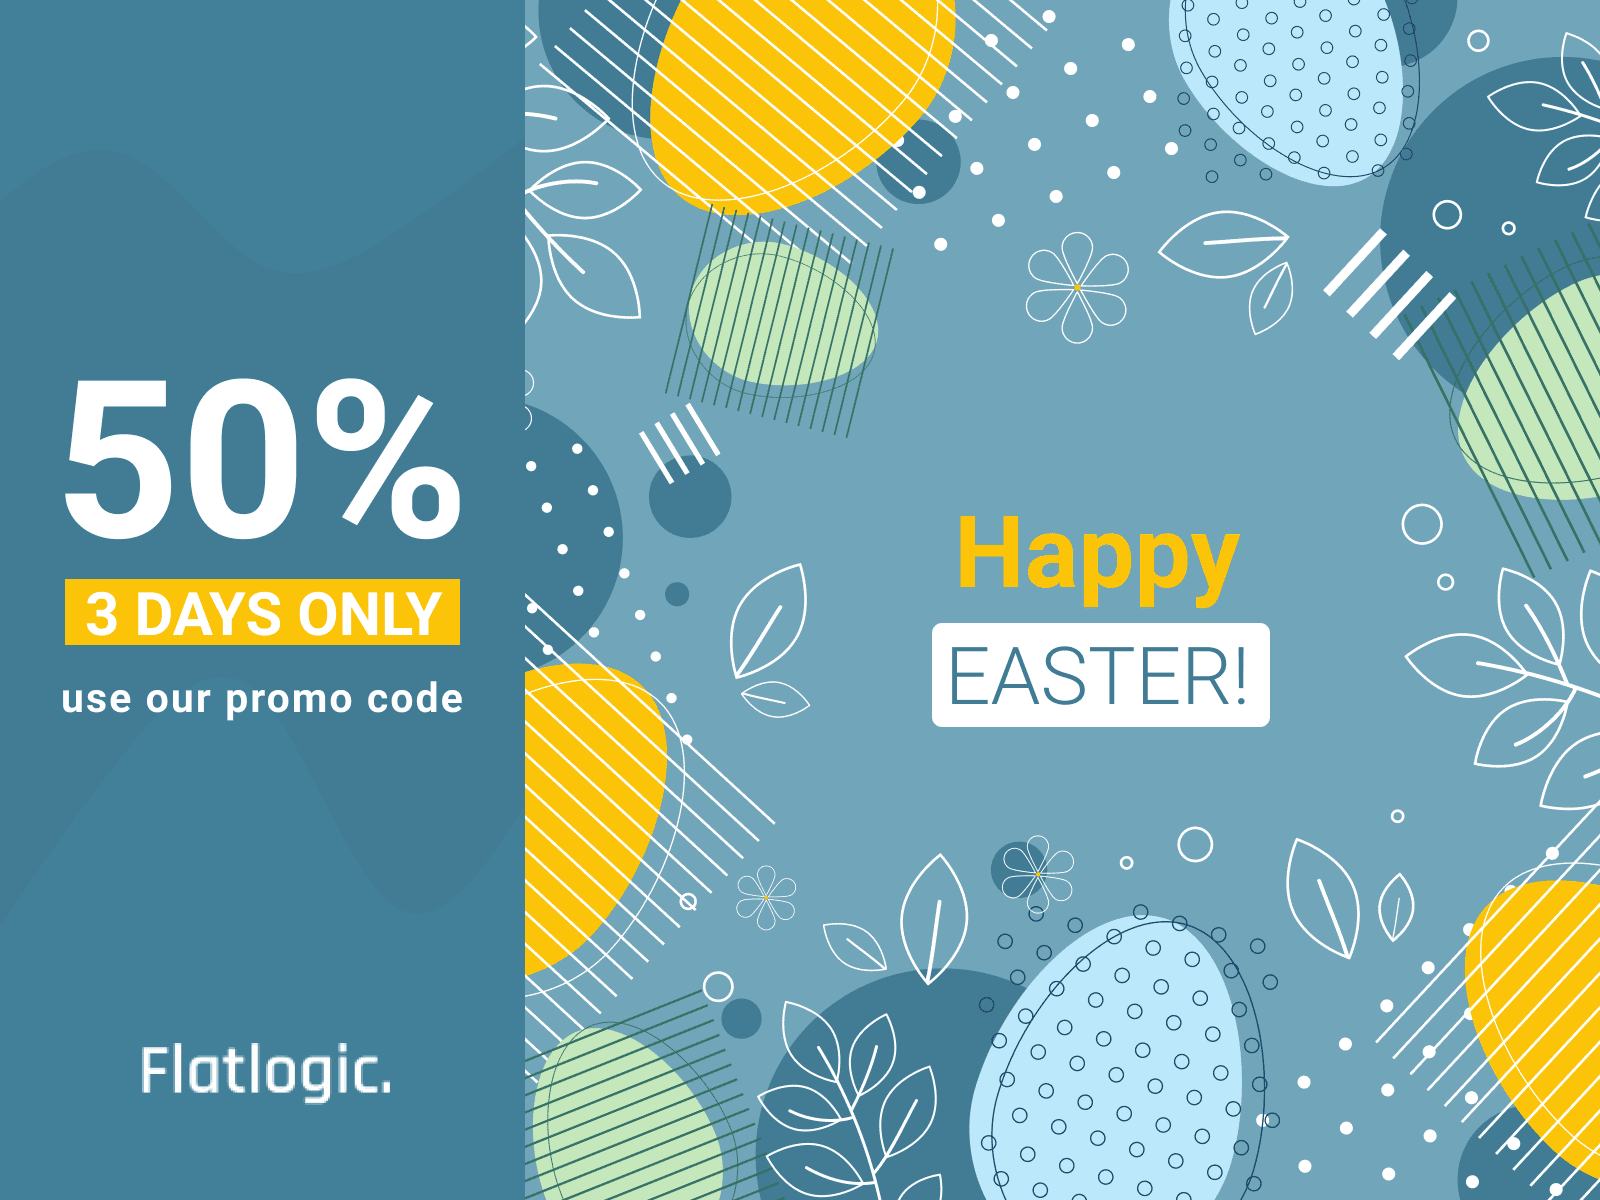 Happy Easter! Flatlogic Gives 50% Discount On All Templates